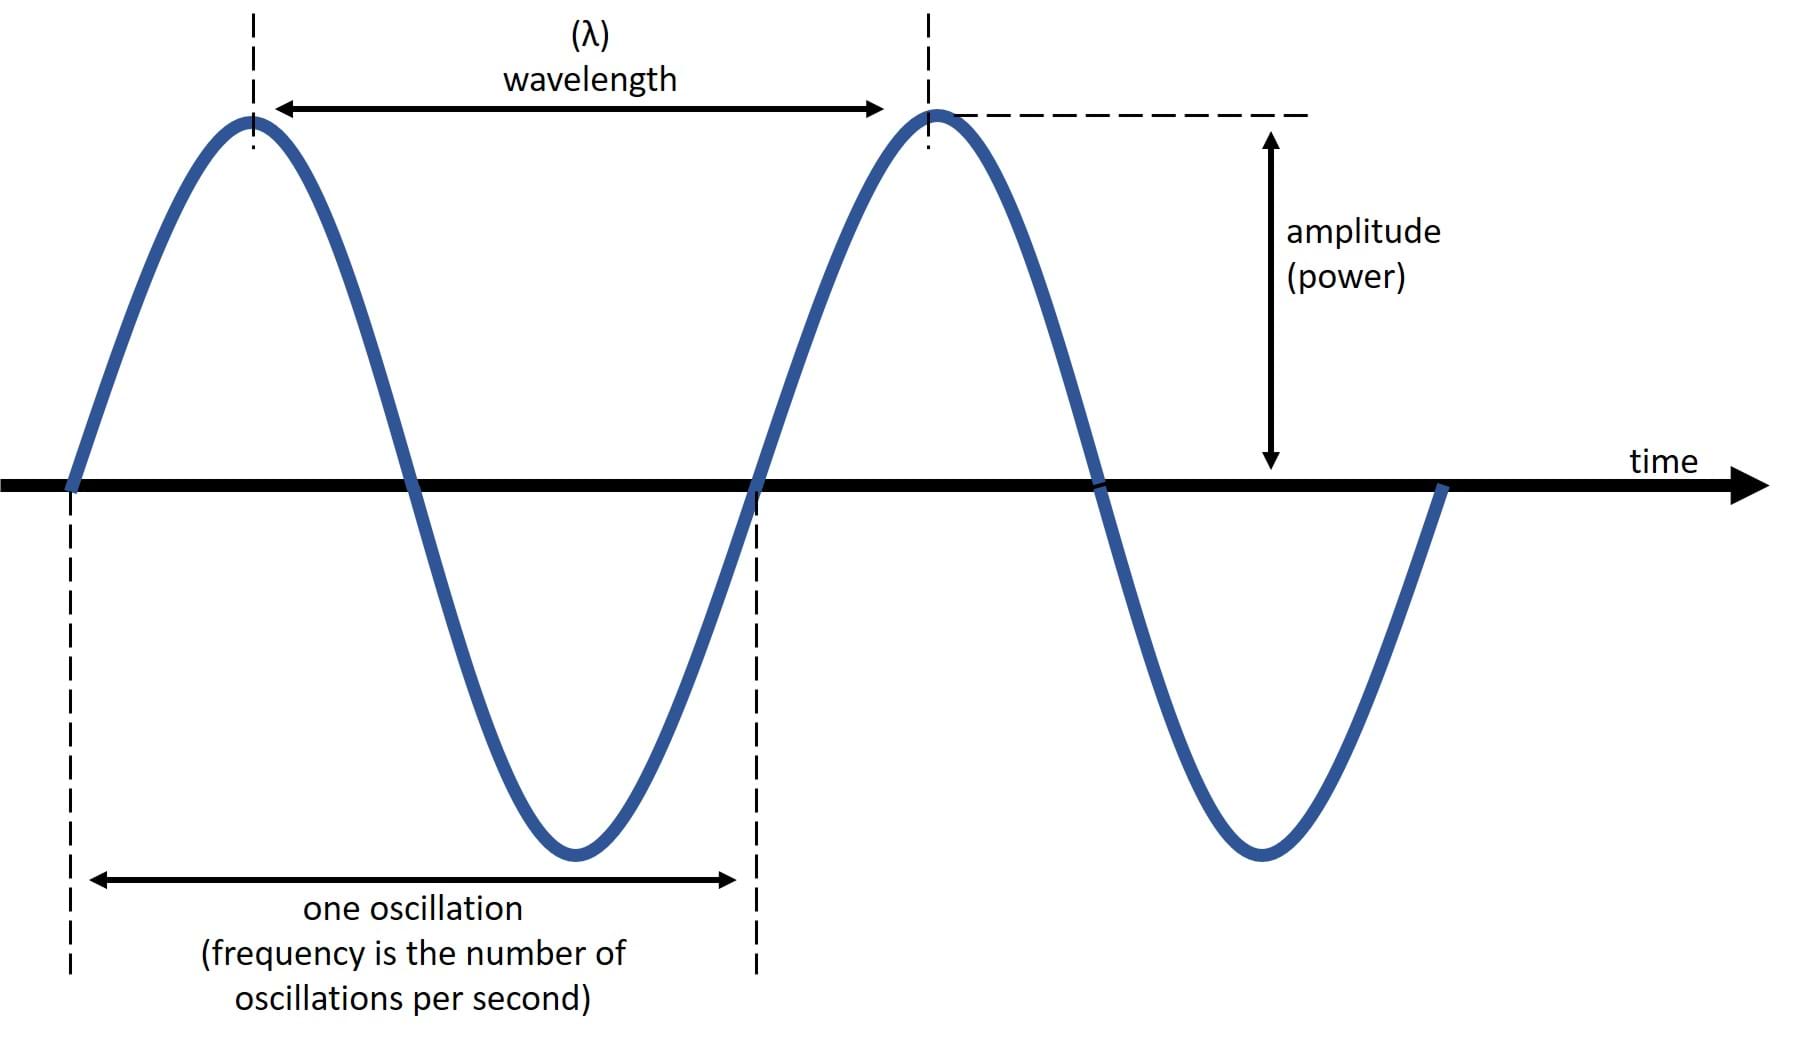 Image of a sound wave. Labels include oscillation, wavelength, amplitude, and time.   